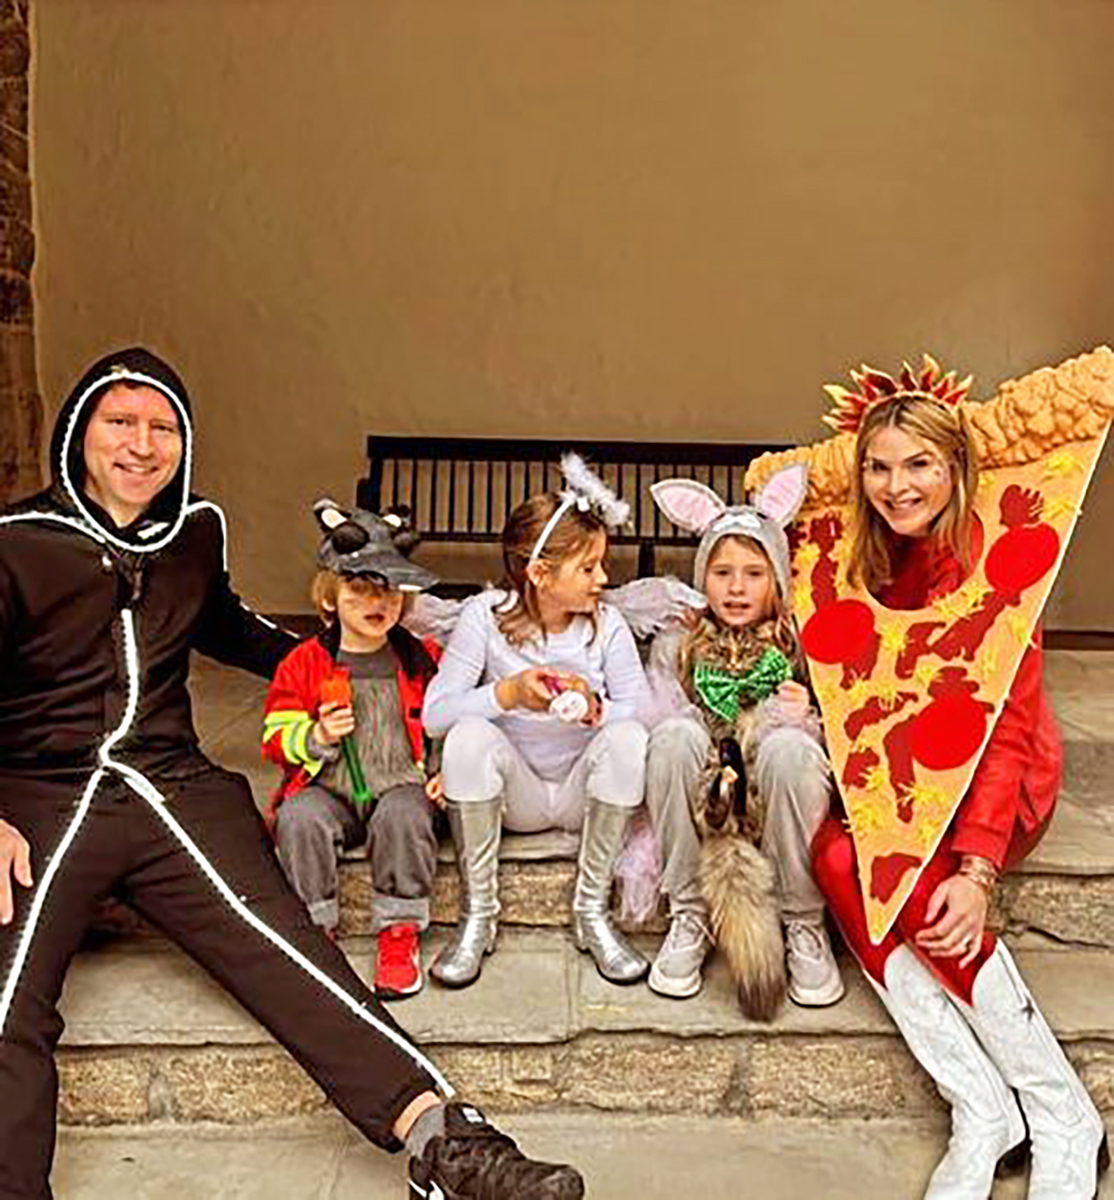 The Most Adorable Celebrity Kid Halloween Costumes of 2023